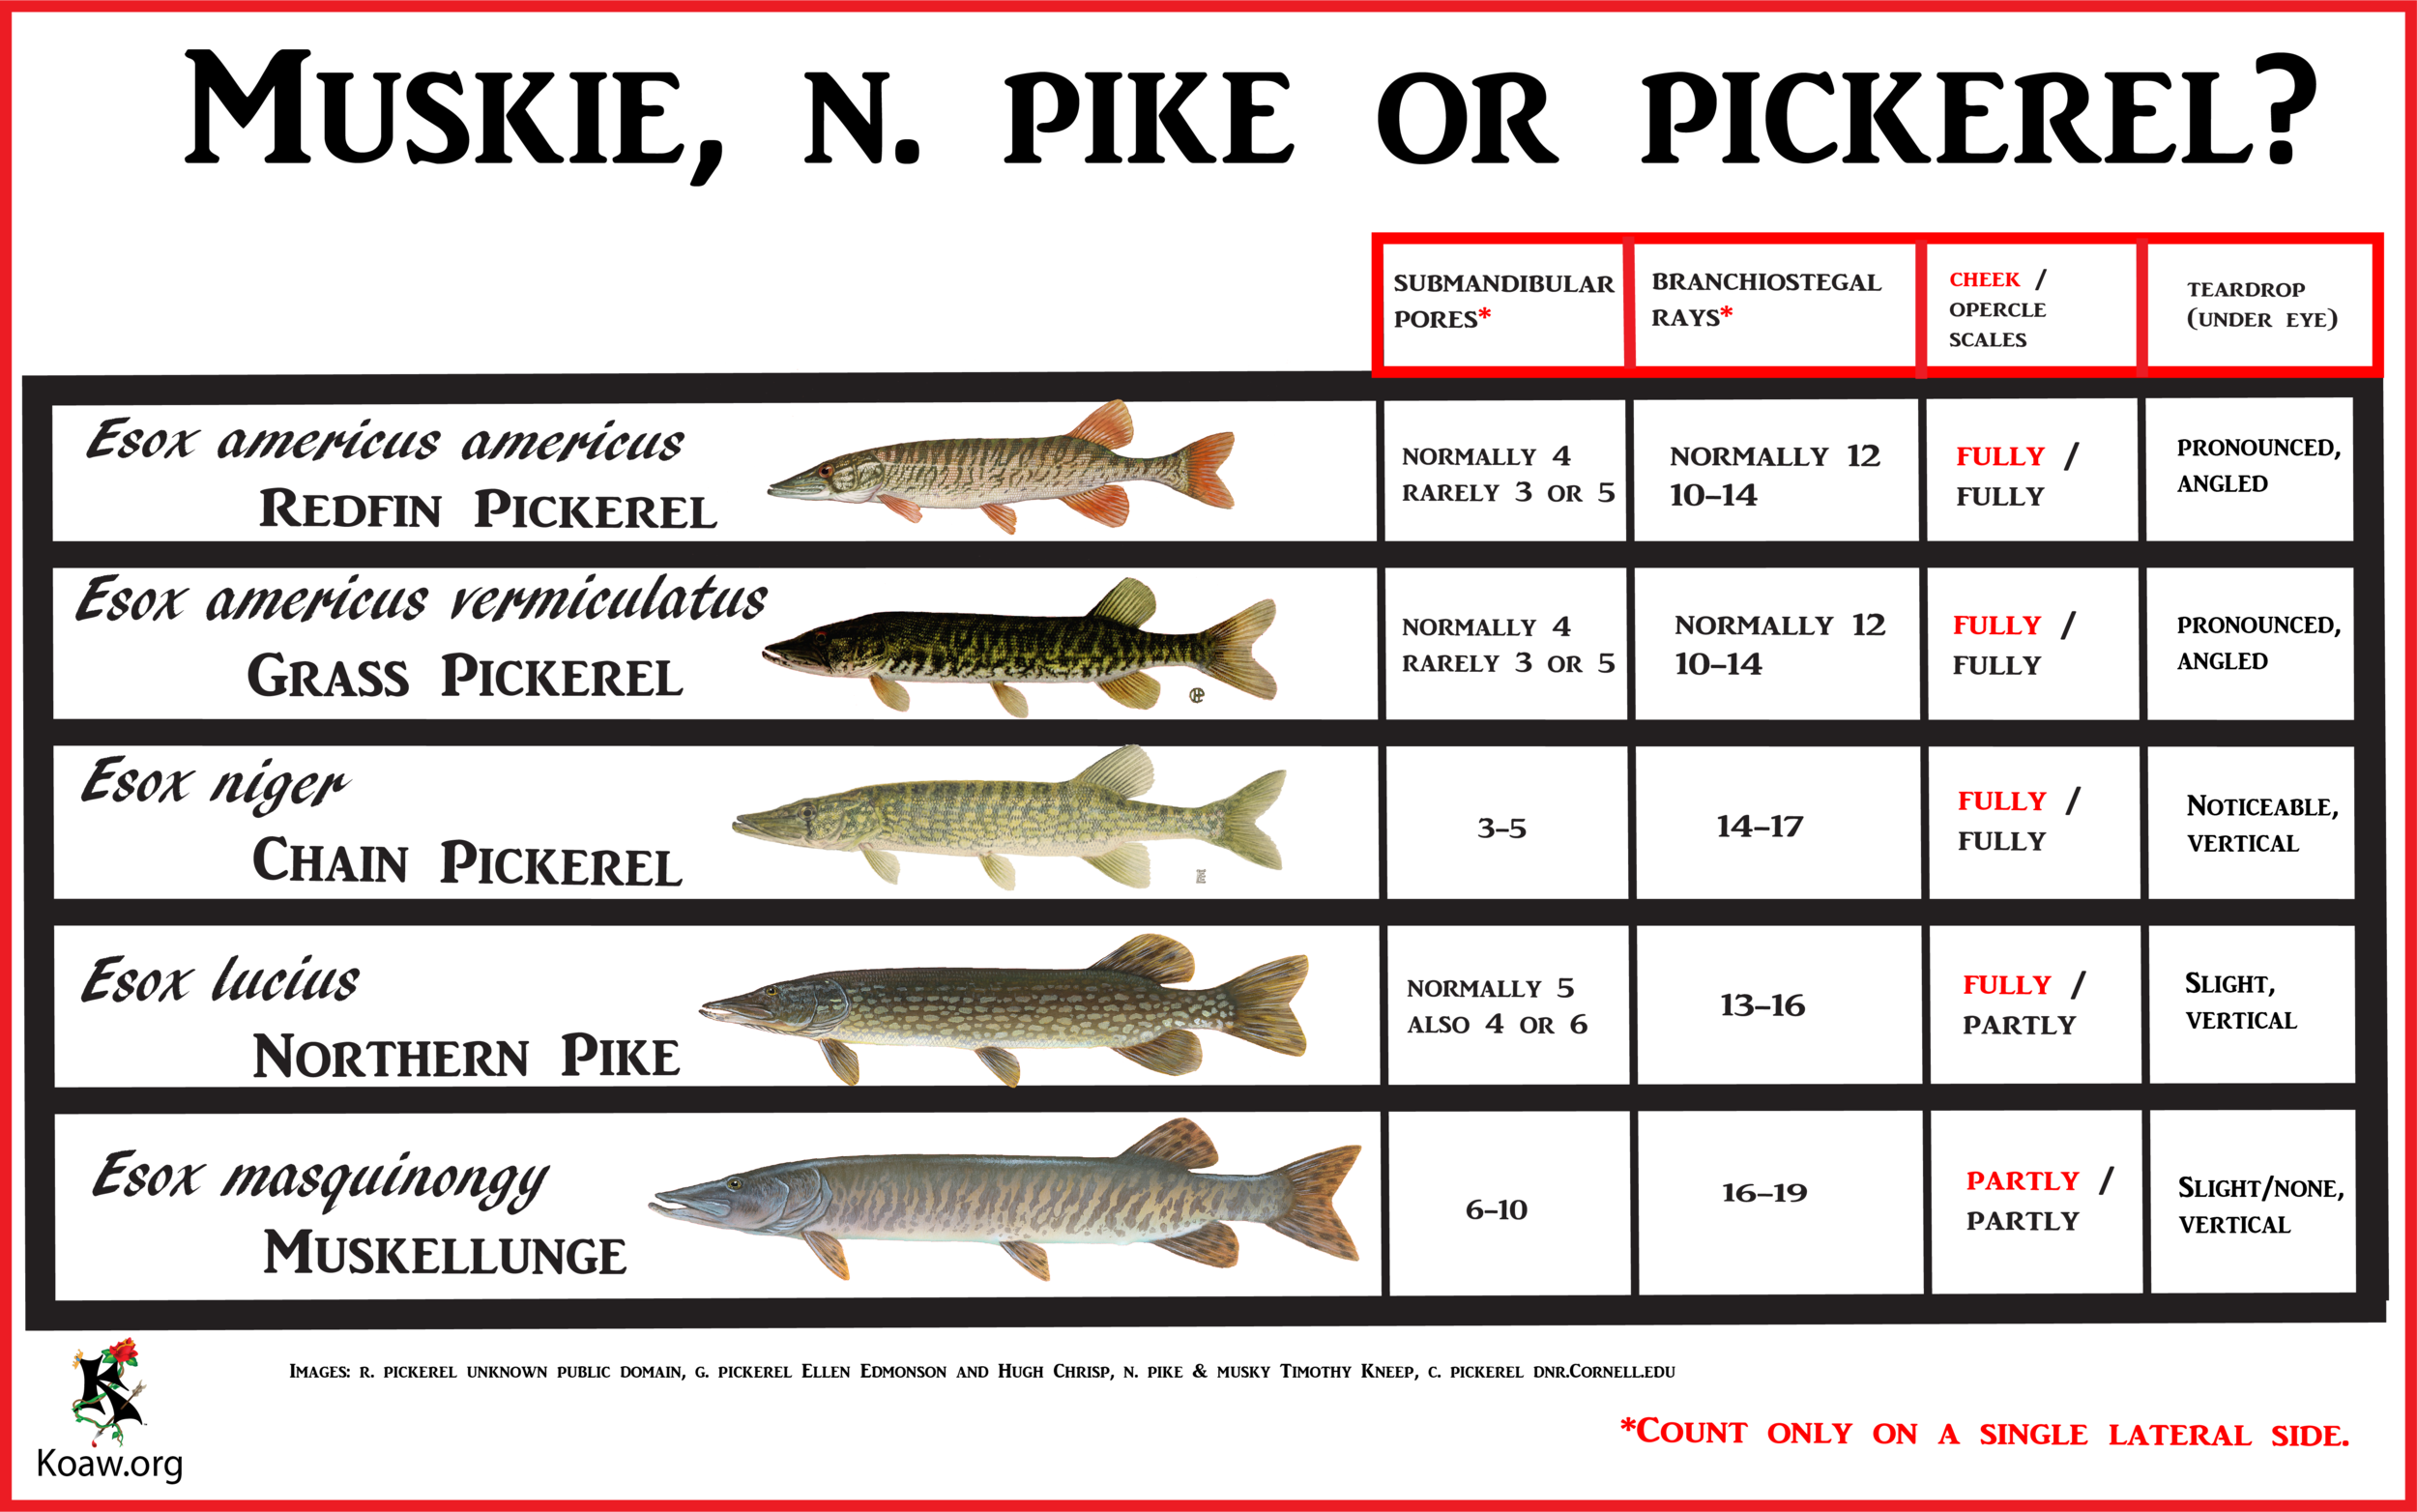 Muskie, Northern Pike or Pickerel? - Illustration by Koaw